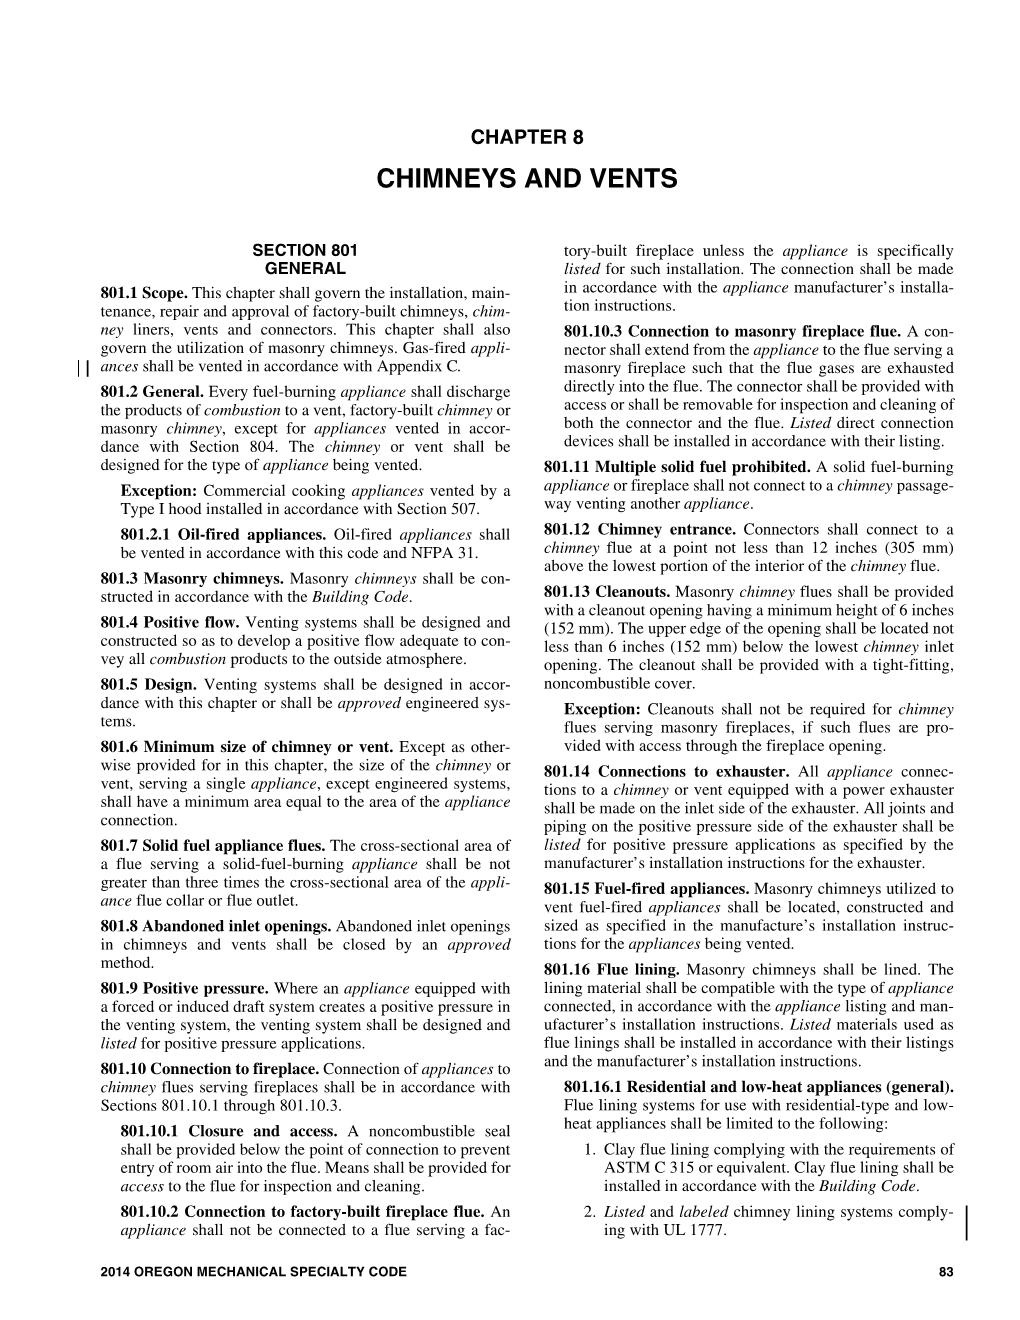 Chapter 8 Chimneys and Vents